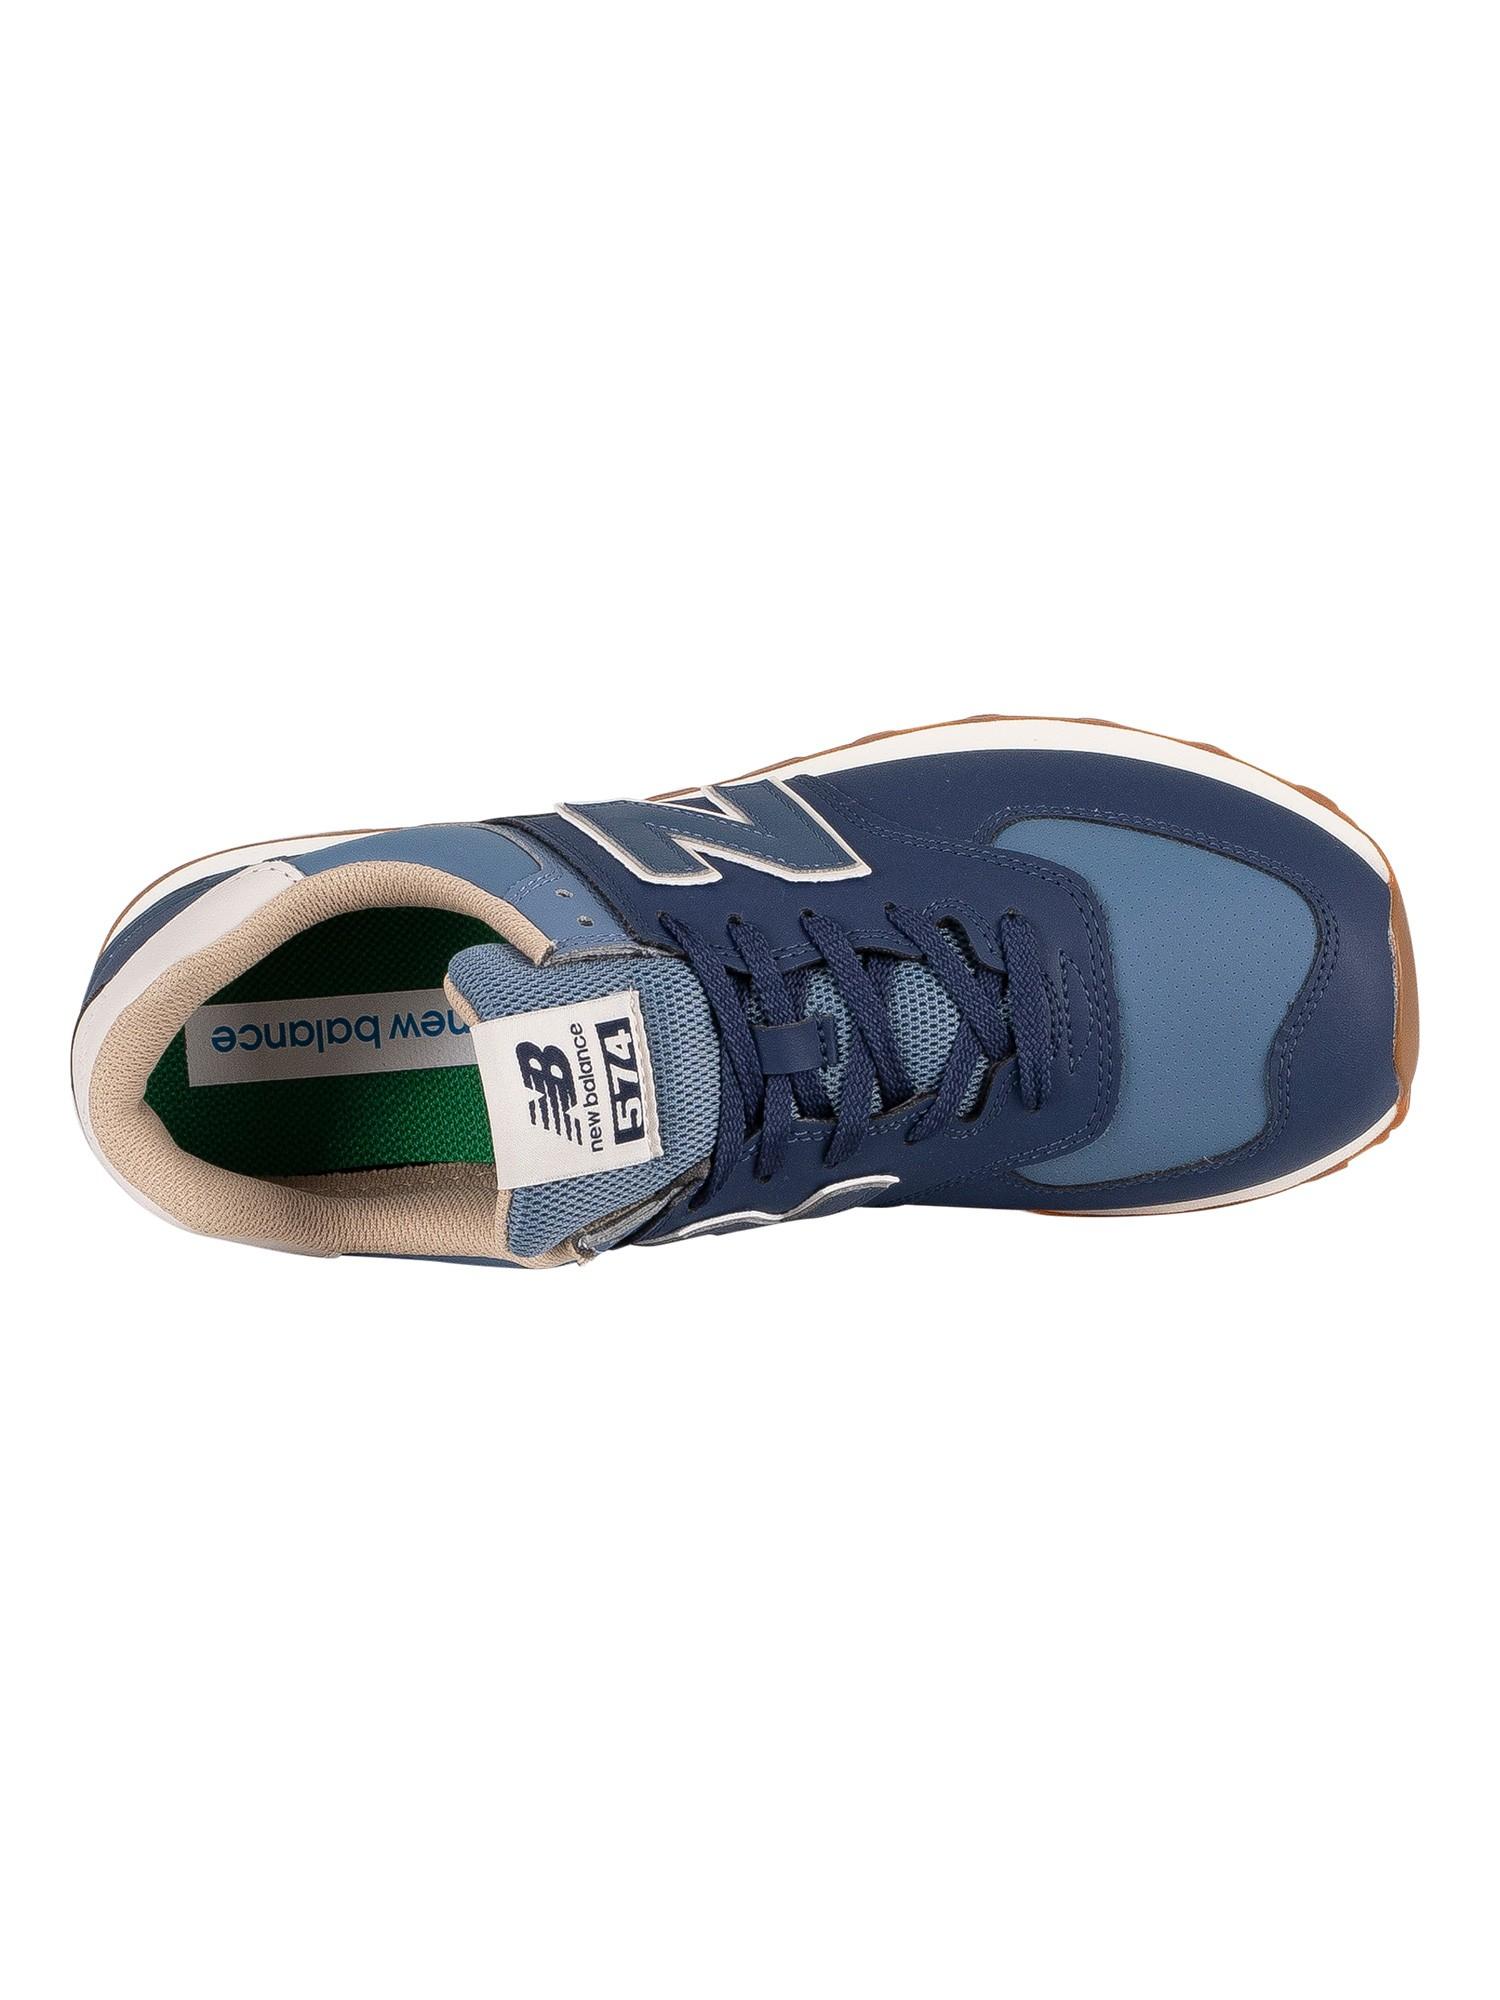 New Balance 574 Vegan Leather Trainers in Blue | Lyst